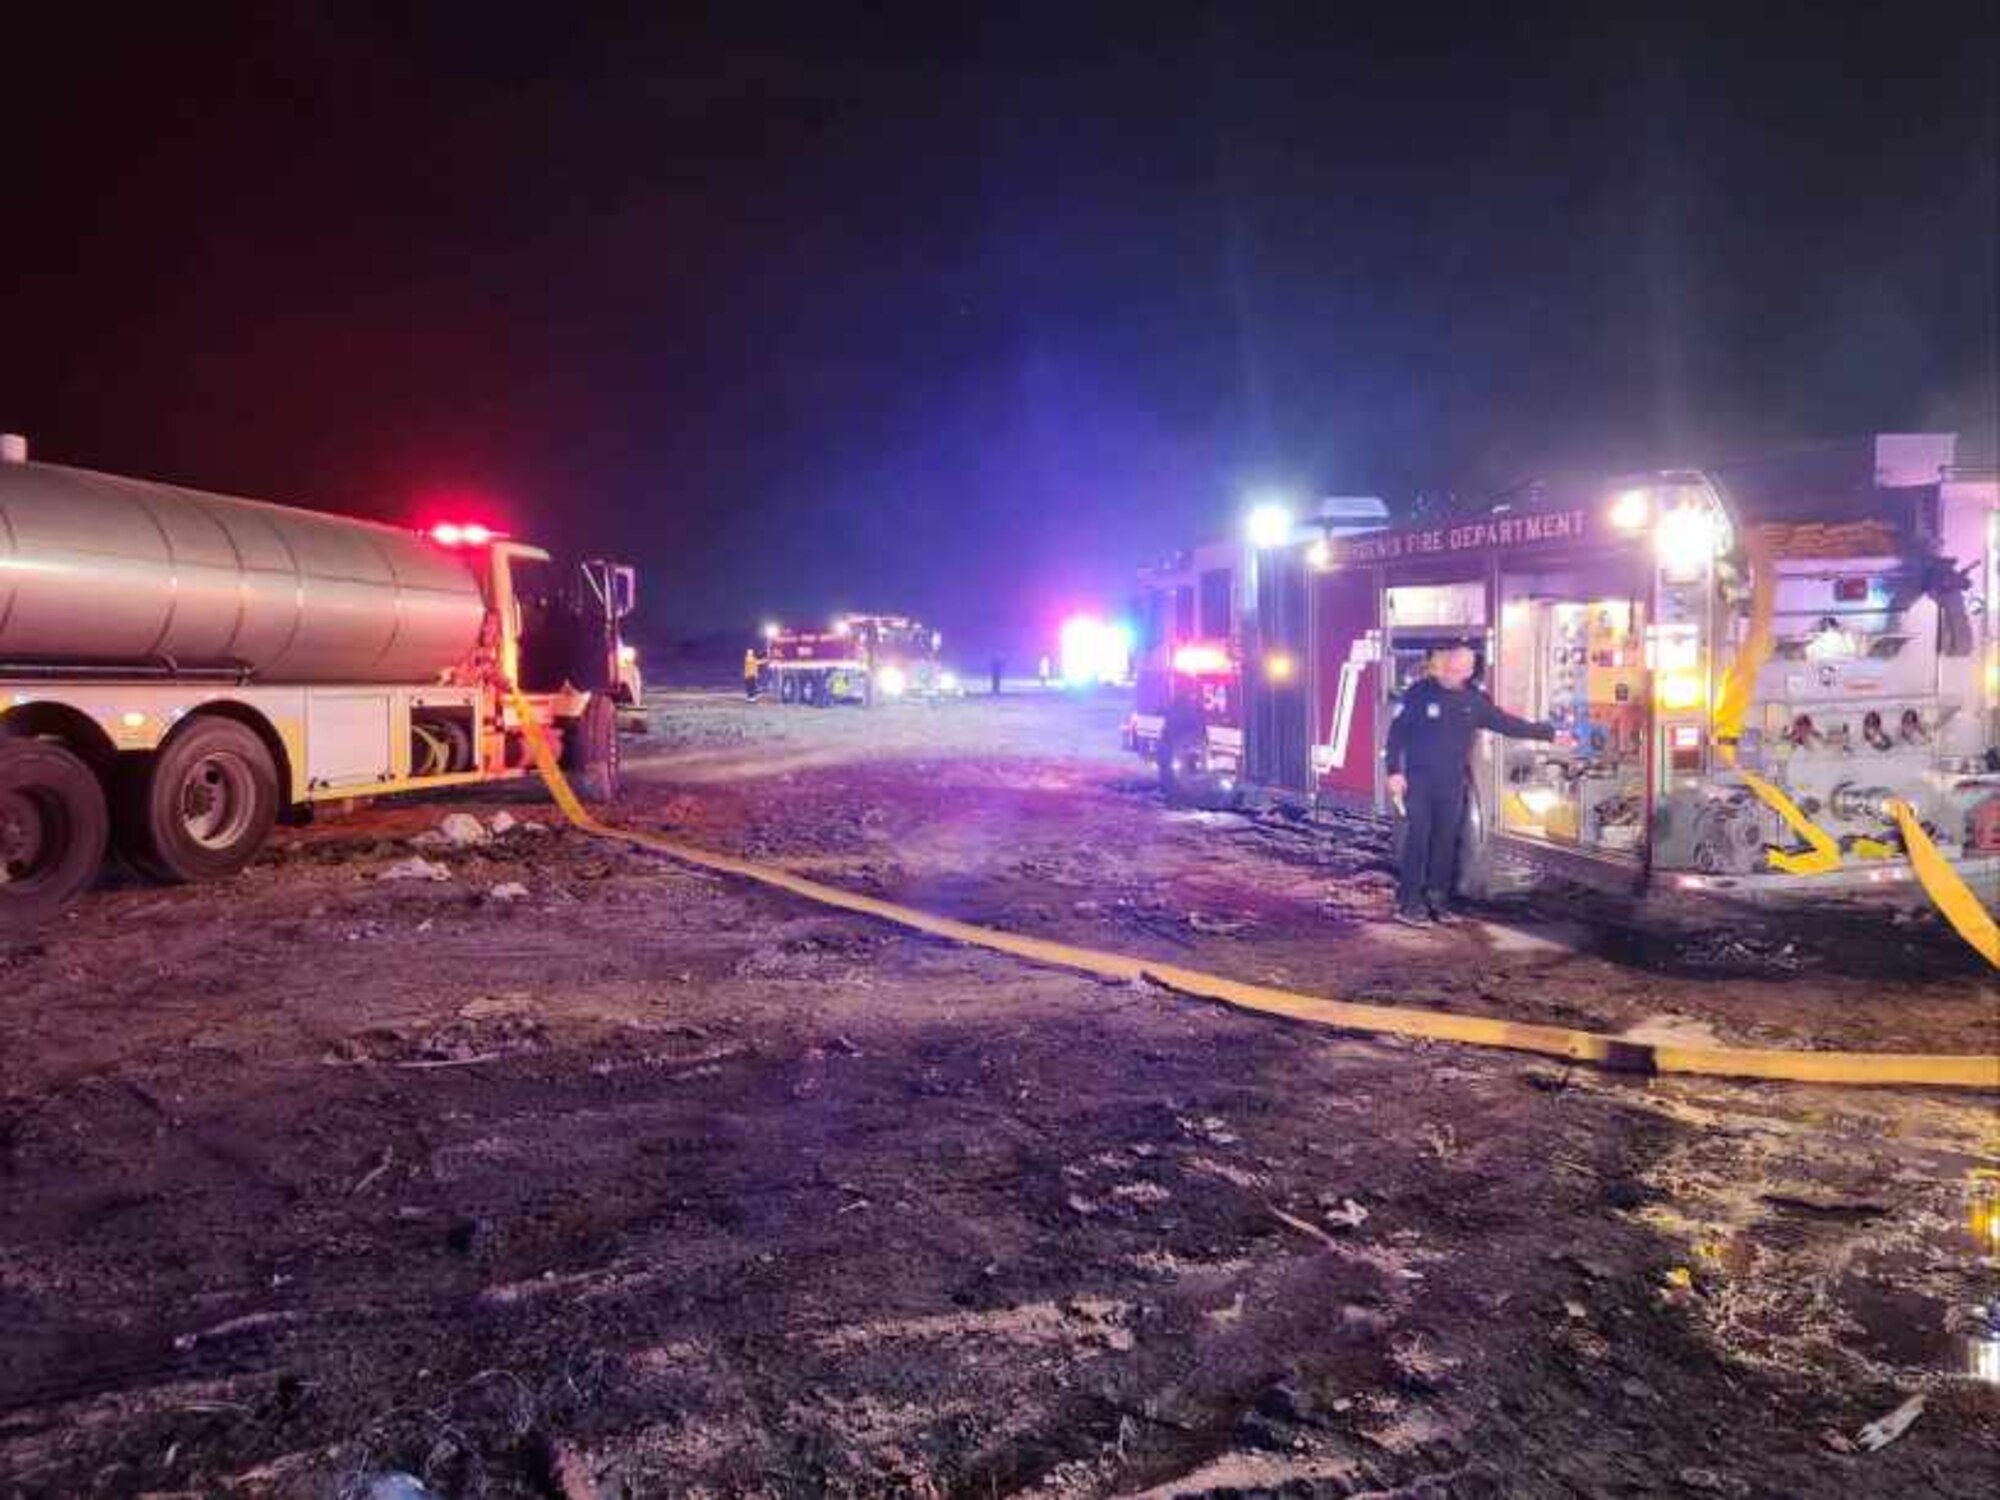 A Phoenix Fire Department firetruck (left) and a 56th Civil Engineer Squadron Fire Department water tanker (right) respond to a 3-acre fire at the Glendale Municipal Landfill, around 9 p.m., July 19, 2023, in Glendale, Arizona.